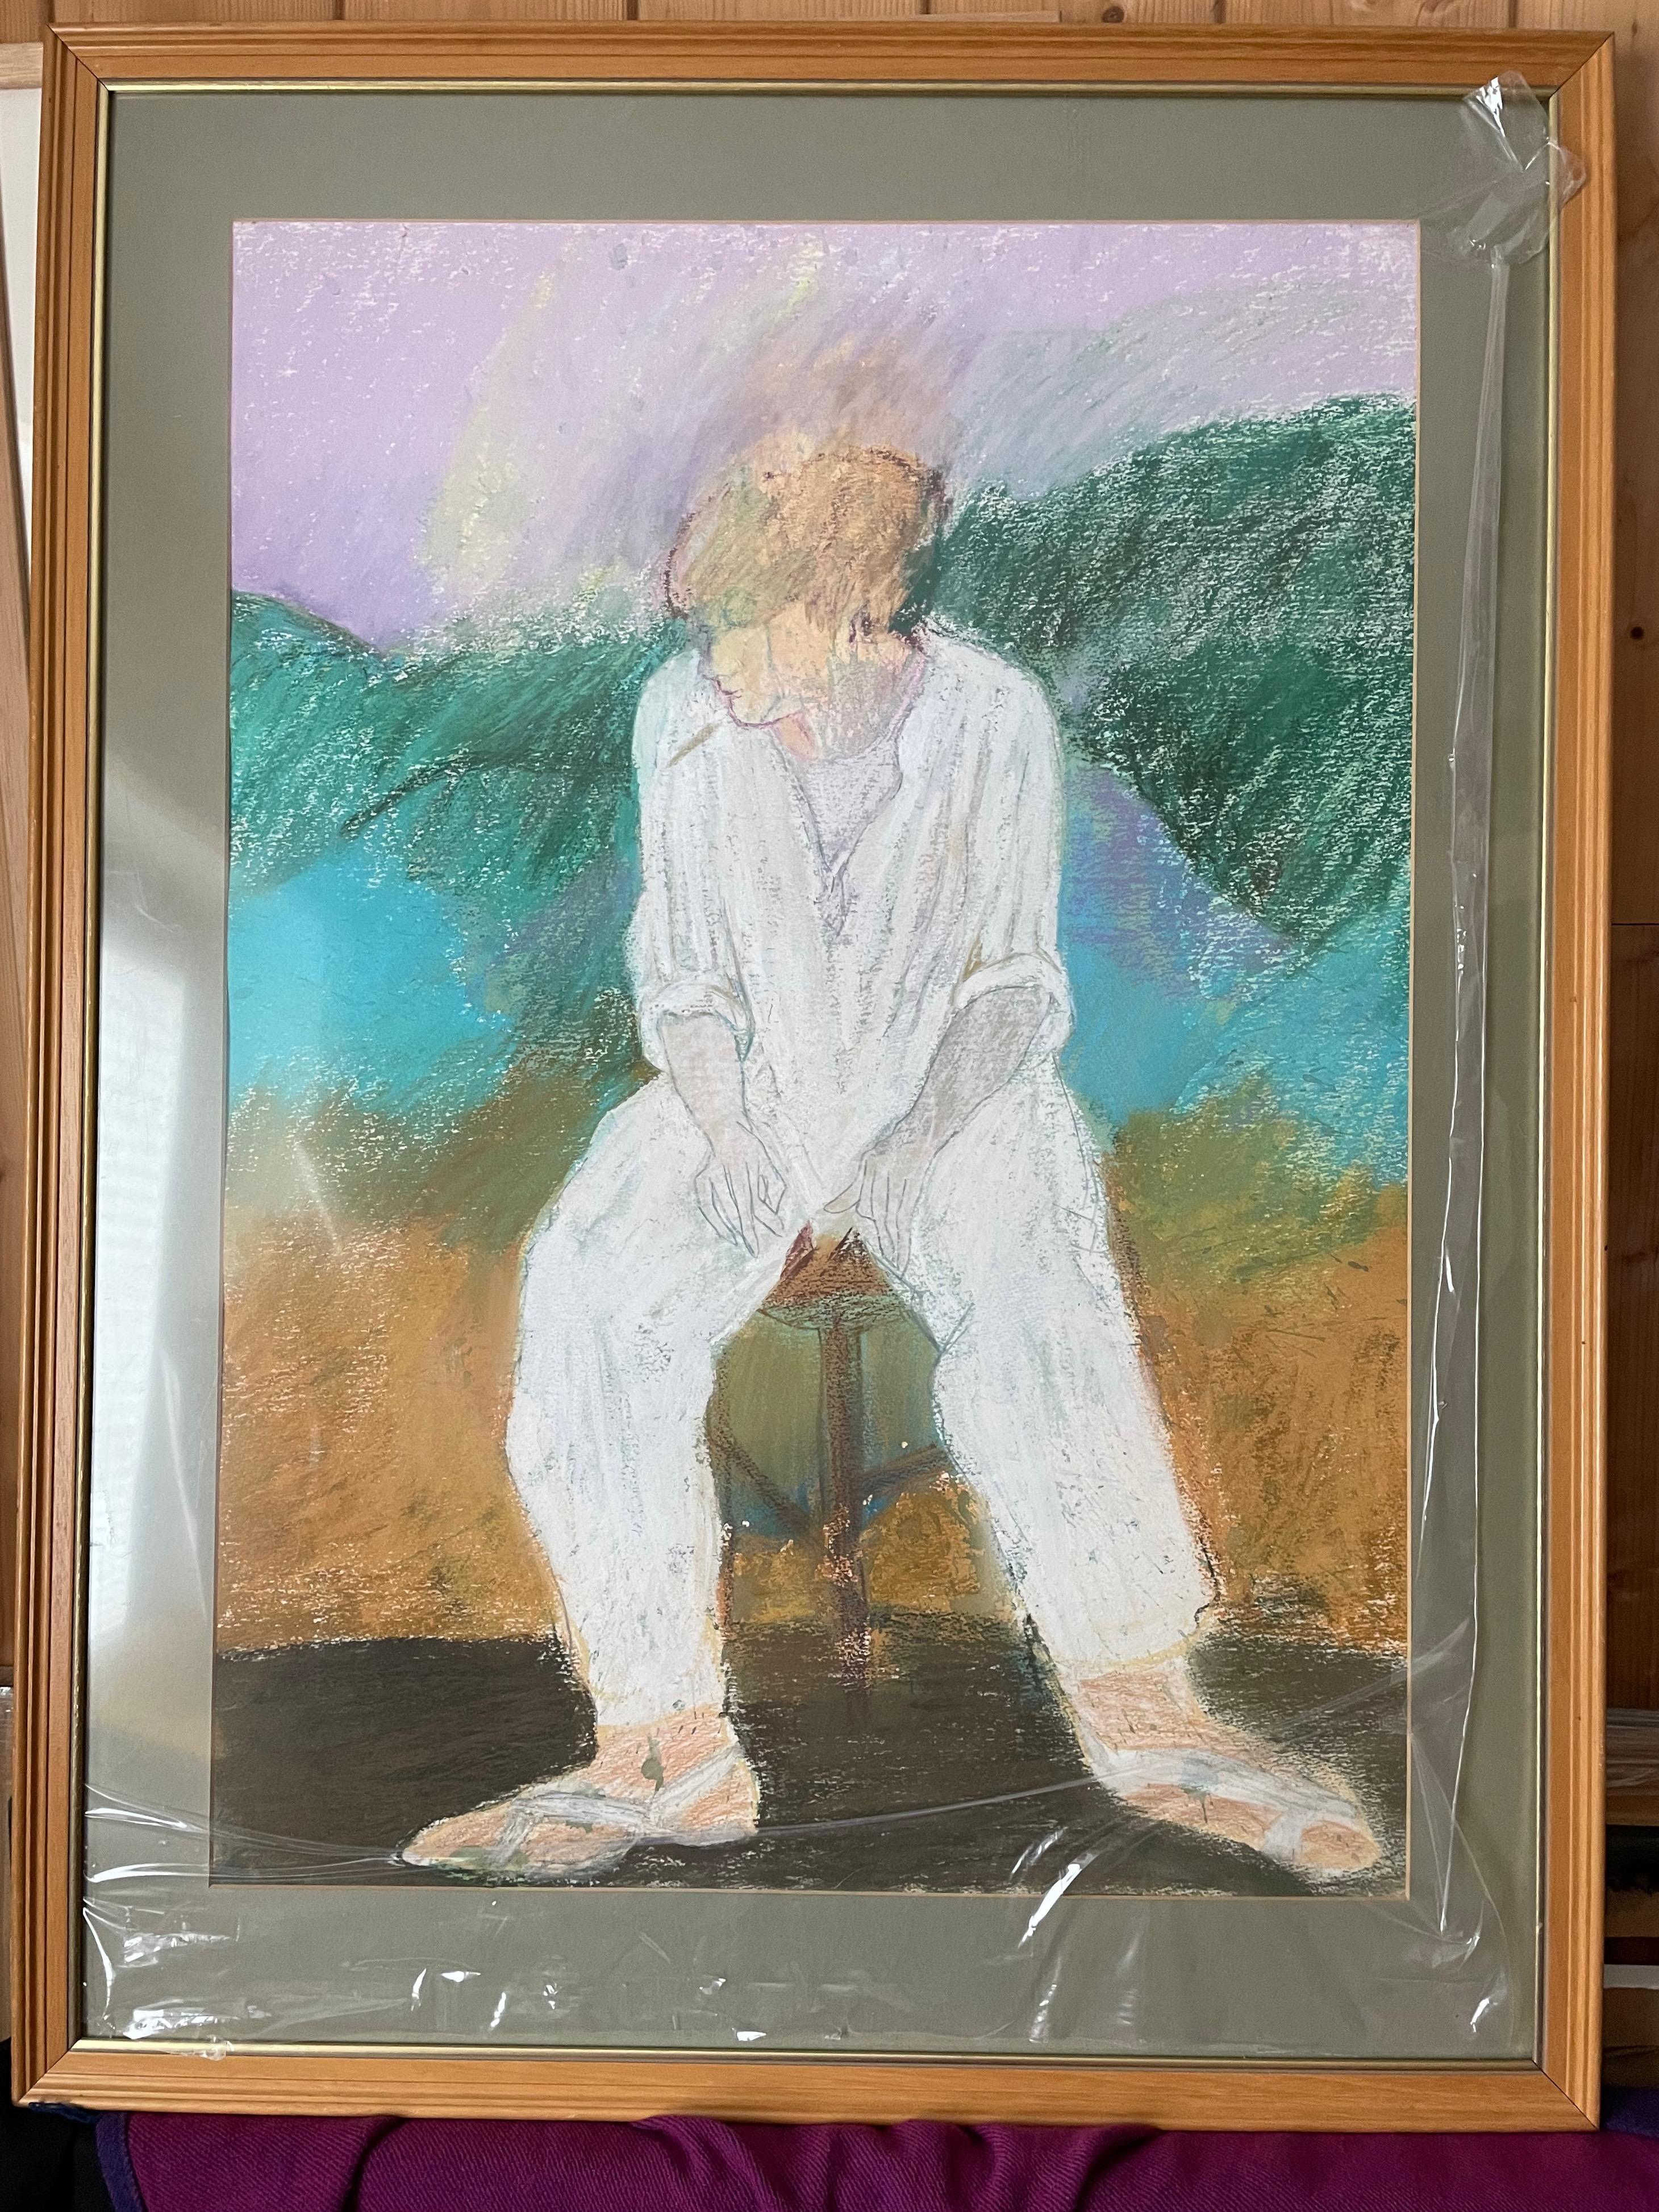 Beautiful pastel painting of a young boy, very reminsent of Summer

From the studio of London based artist Caroline Hands

Framed in contemporary wooden frame

Image 30x20